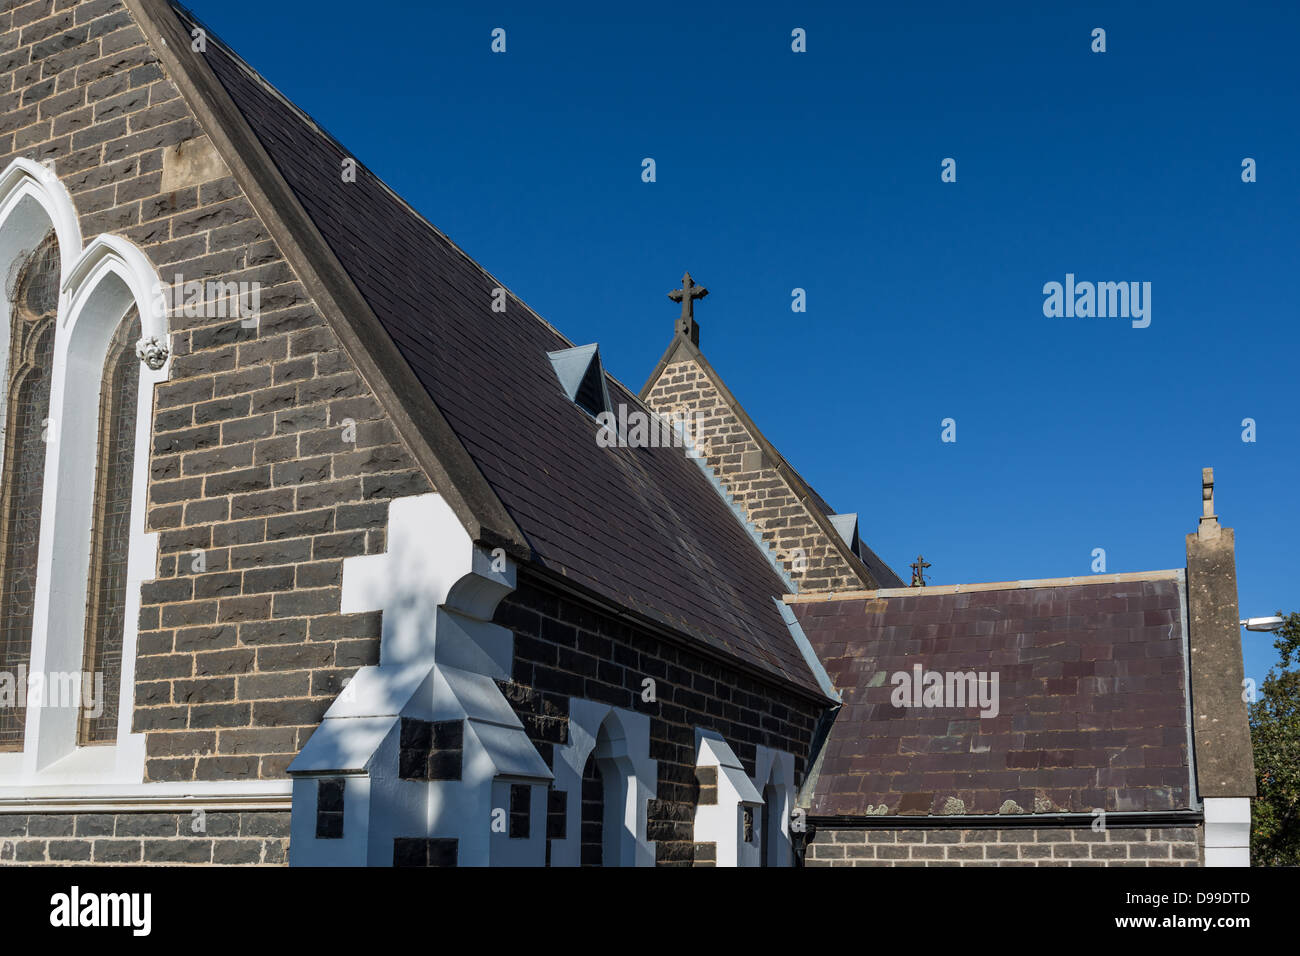 St Mary's Anglican Church, Sunbury, Victoria, Australie Banque D'Images